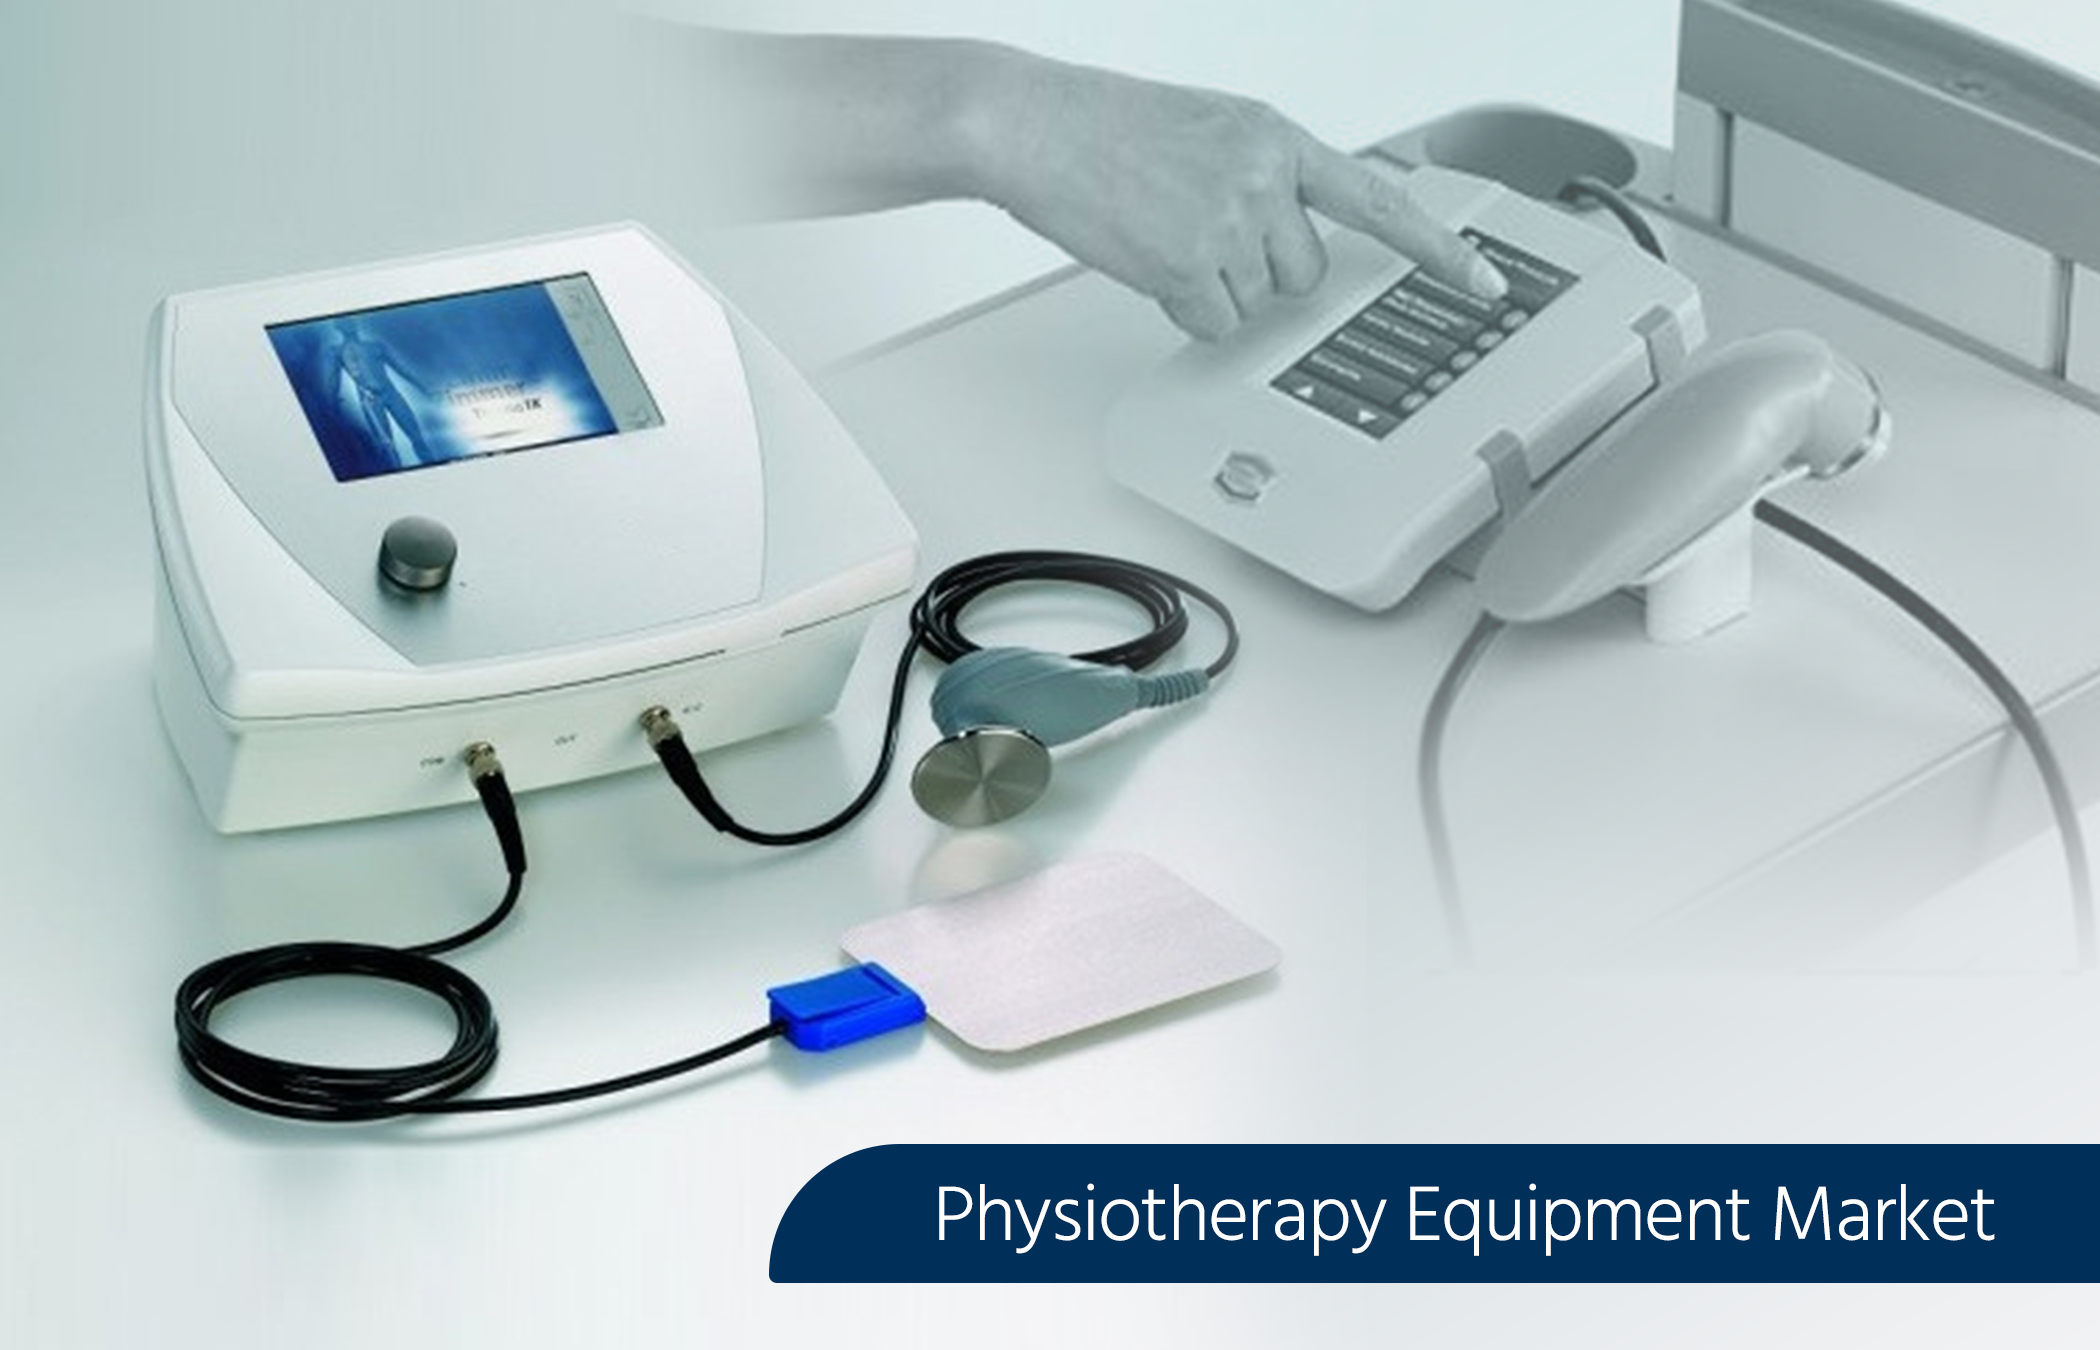 Physiotherapy Equipment Market Analysis by Top Players (2019-2030) | BTL, EMS Physio, Algeo Limited, Ito Co., Ltd, Whitehall Manufacturing